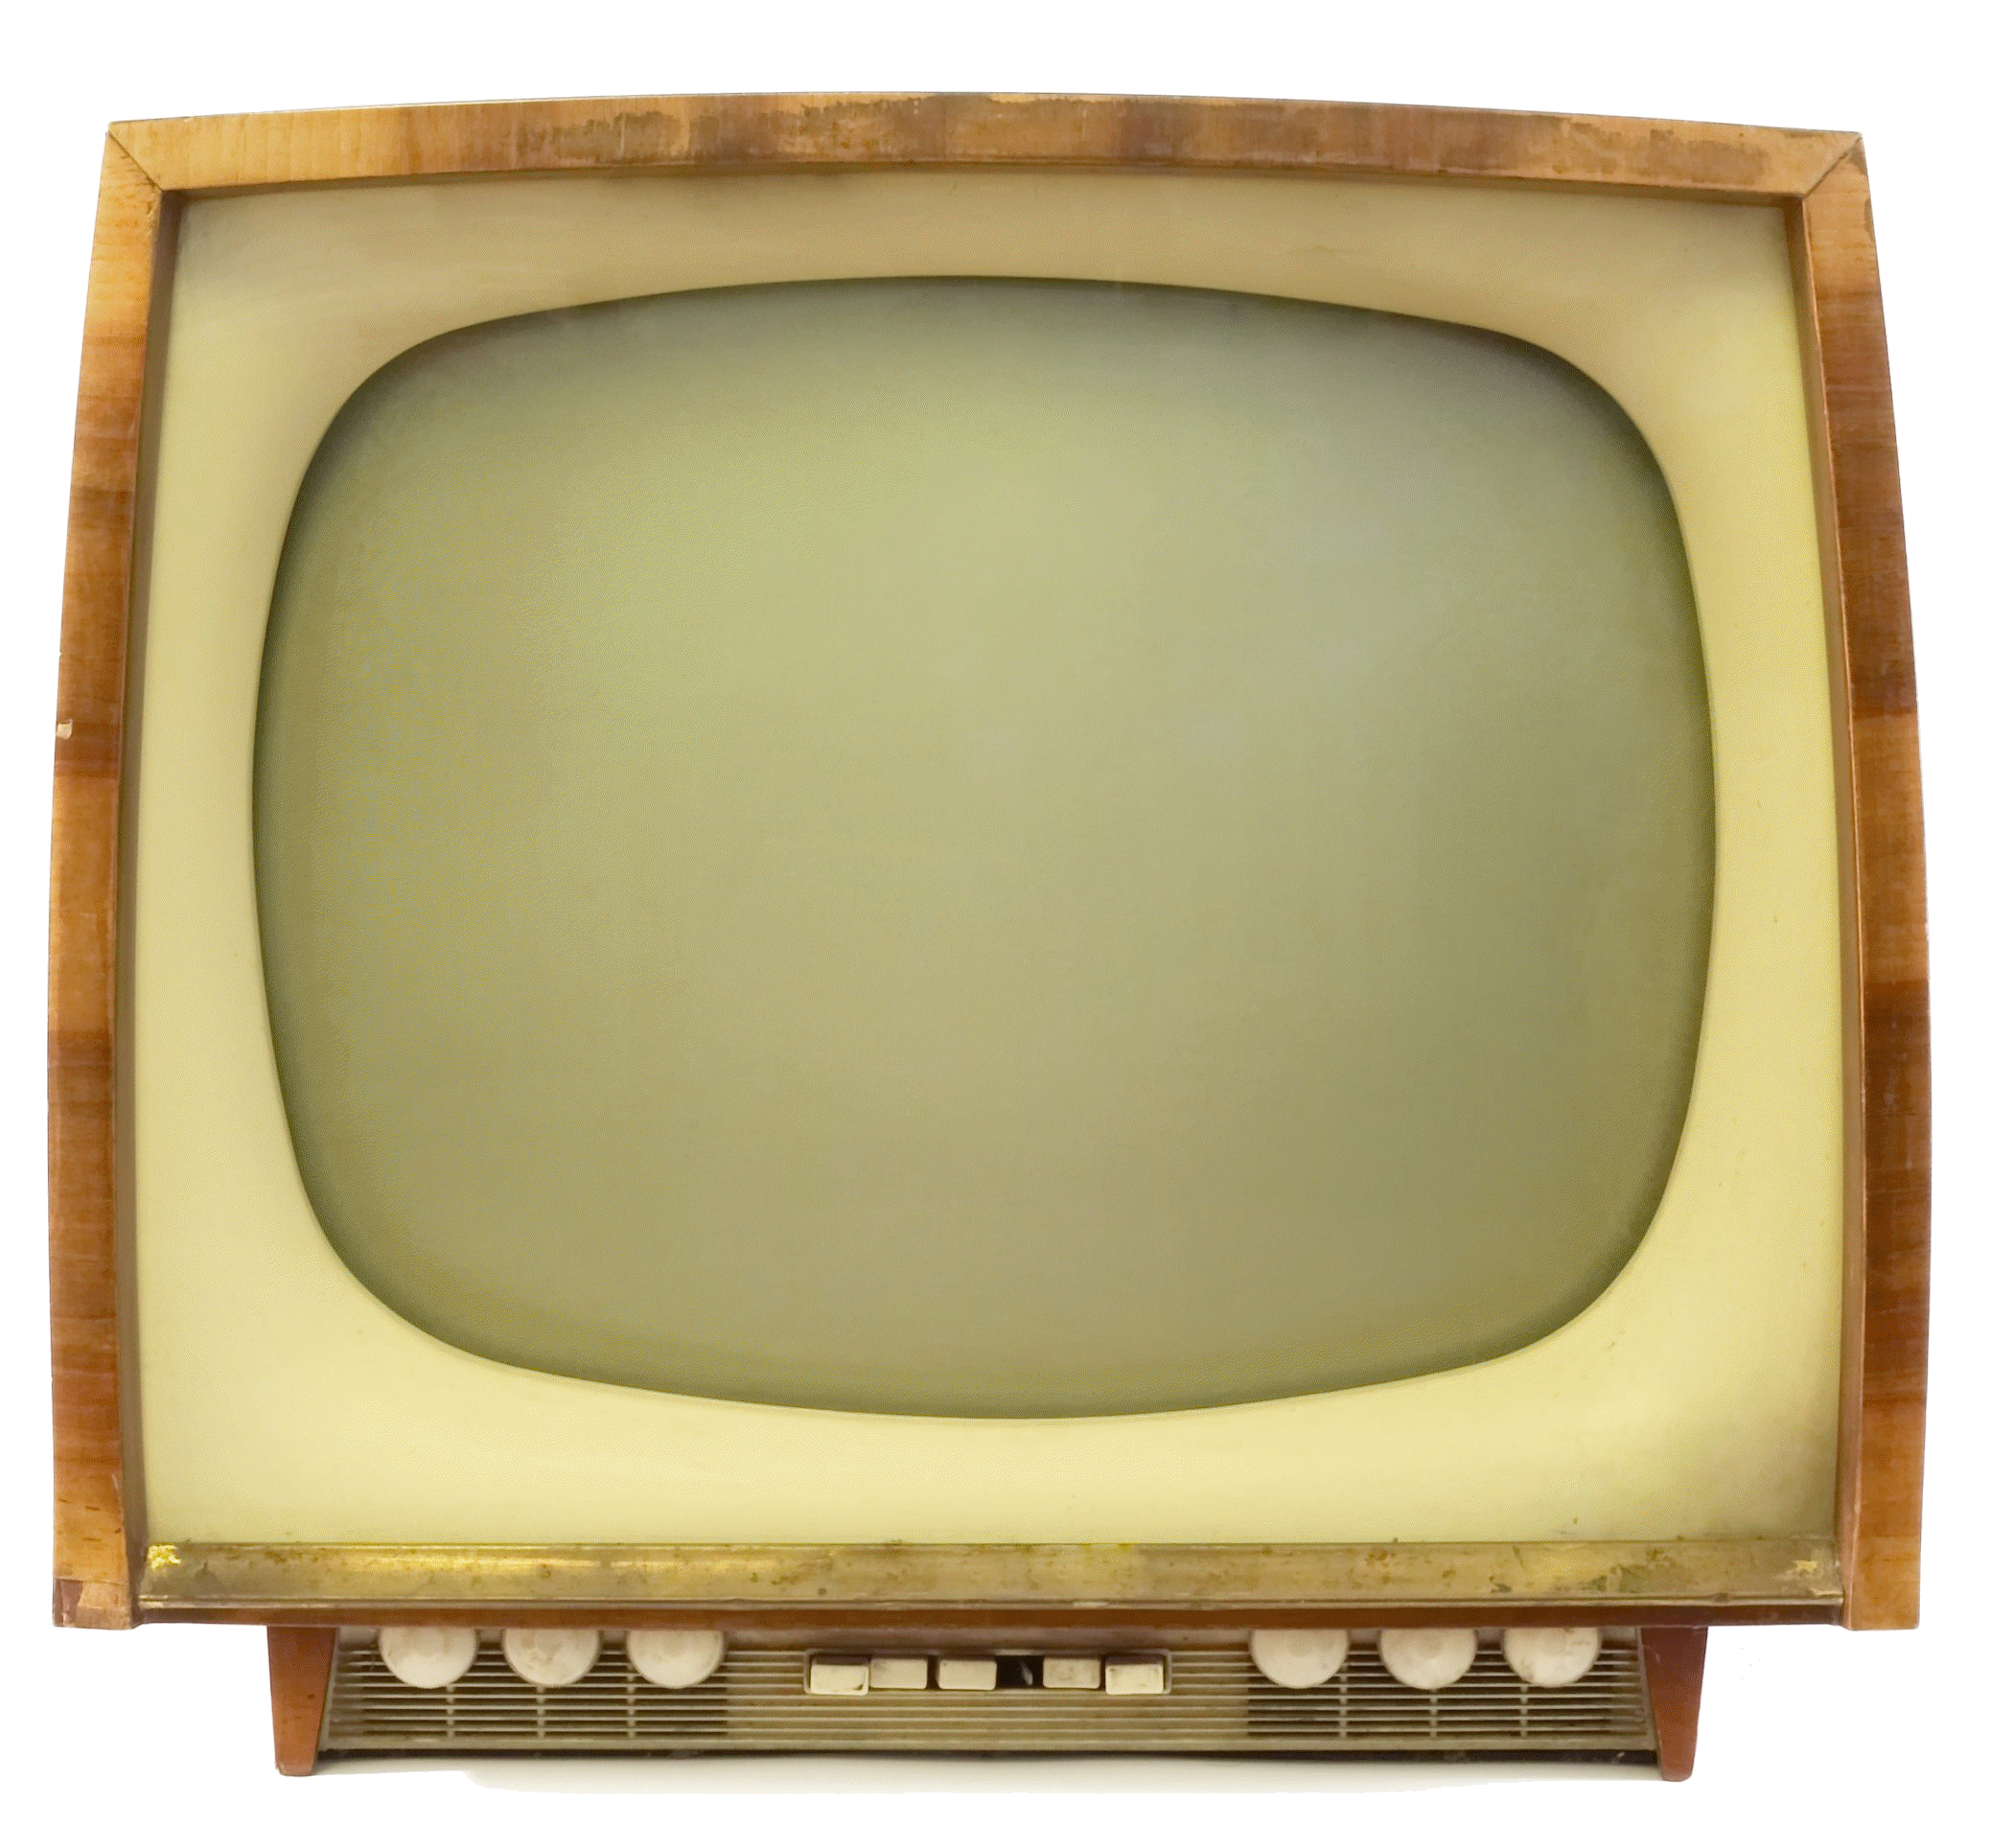 television clipart 1950s tv